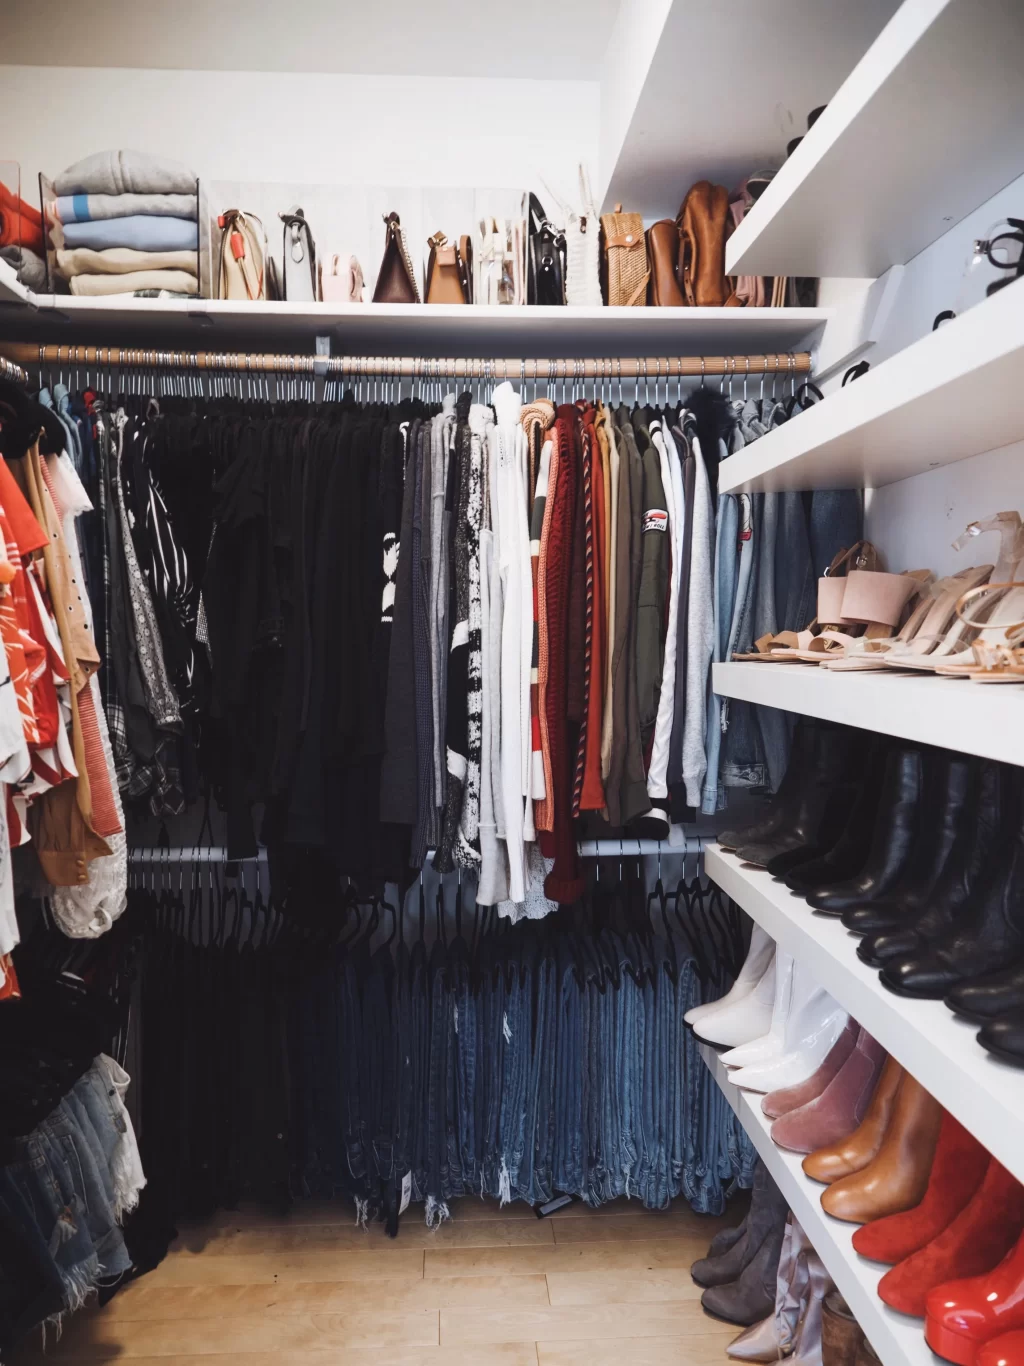 How To Organize Your Closet Like A Pro